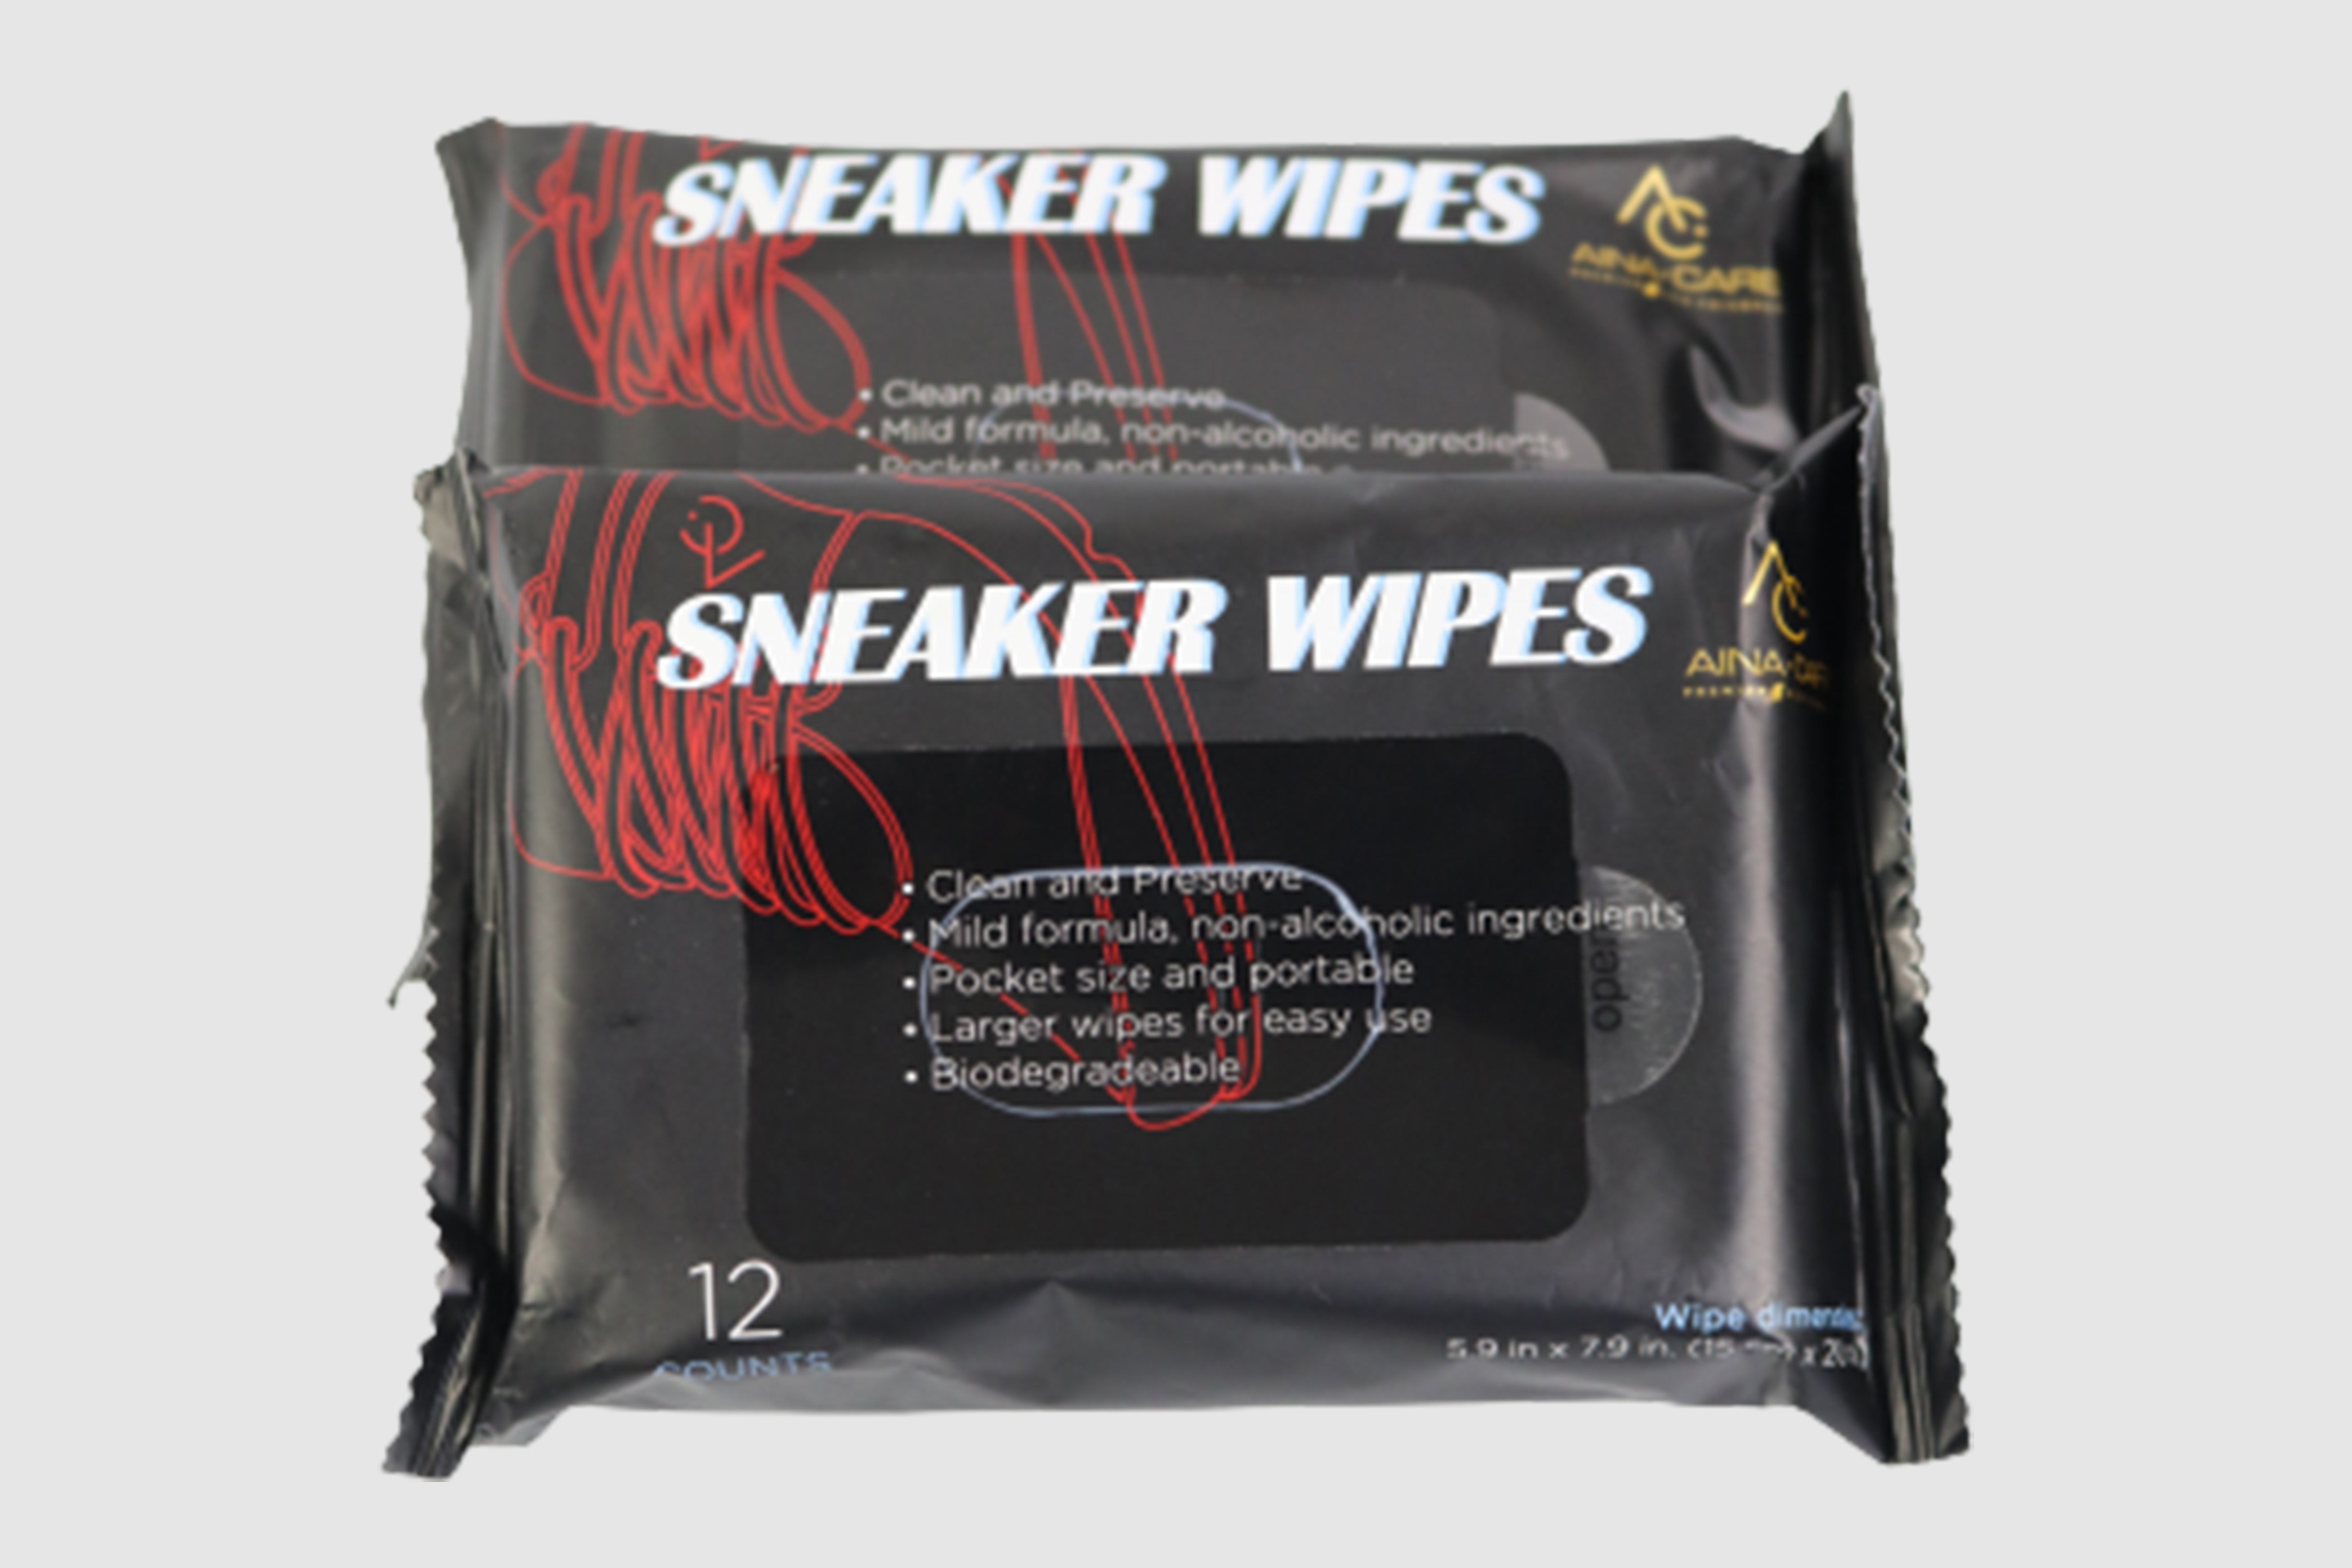 Two packs of All-Purpose Sneaker Wipes from AinaCare on a white background.